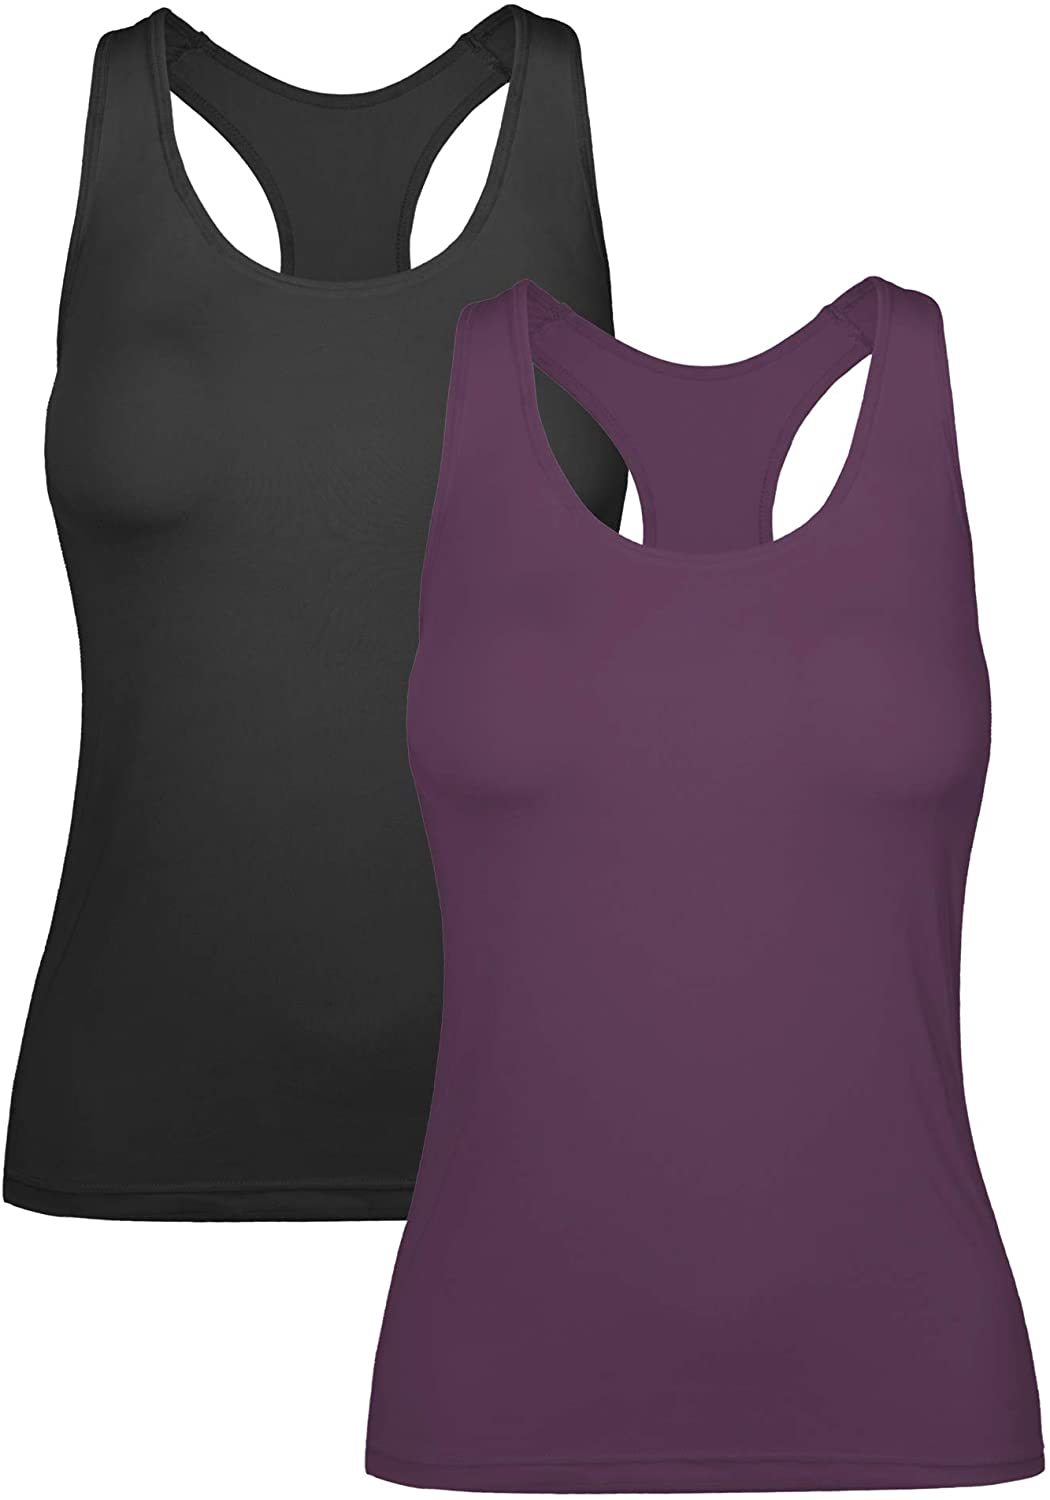 Womens Workout Racerback Tank Tops with Built in Bra Removable Pad Yoga Fitness Activewear Running Gym Exercise Shirts 